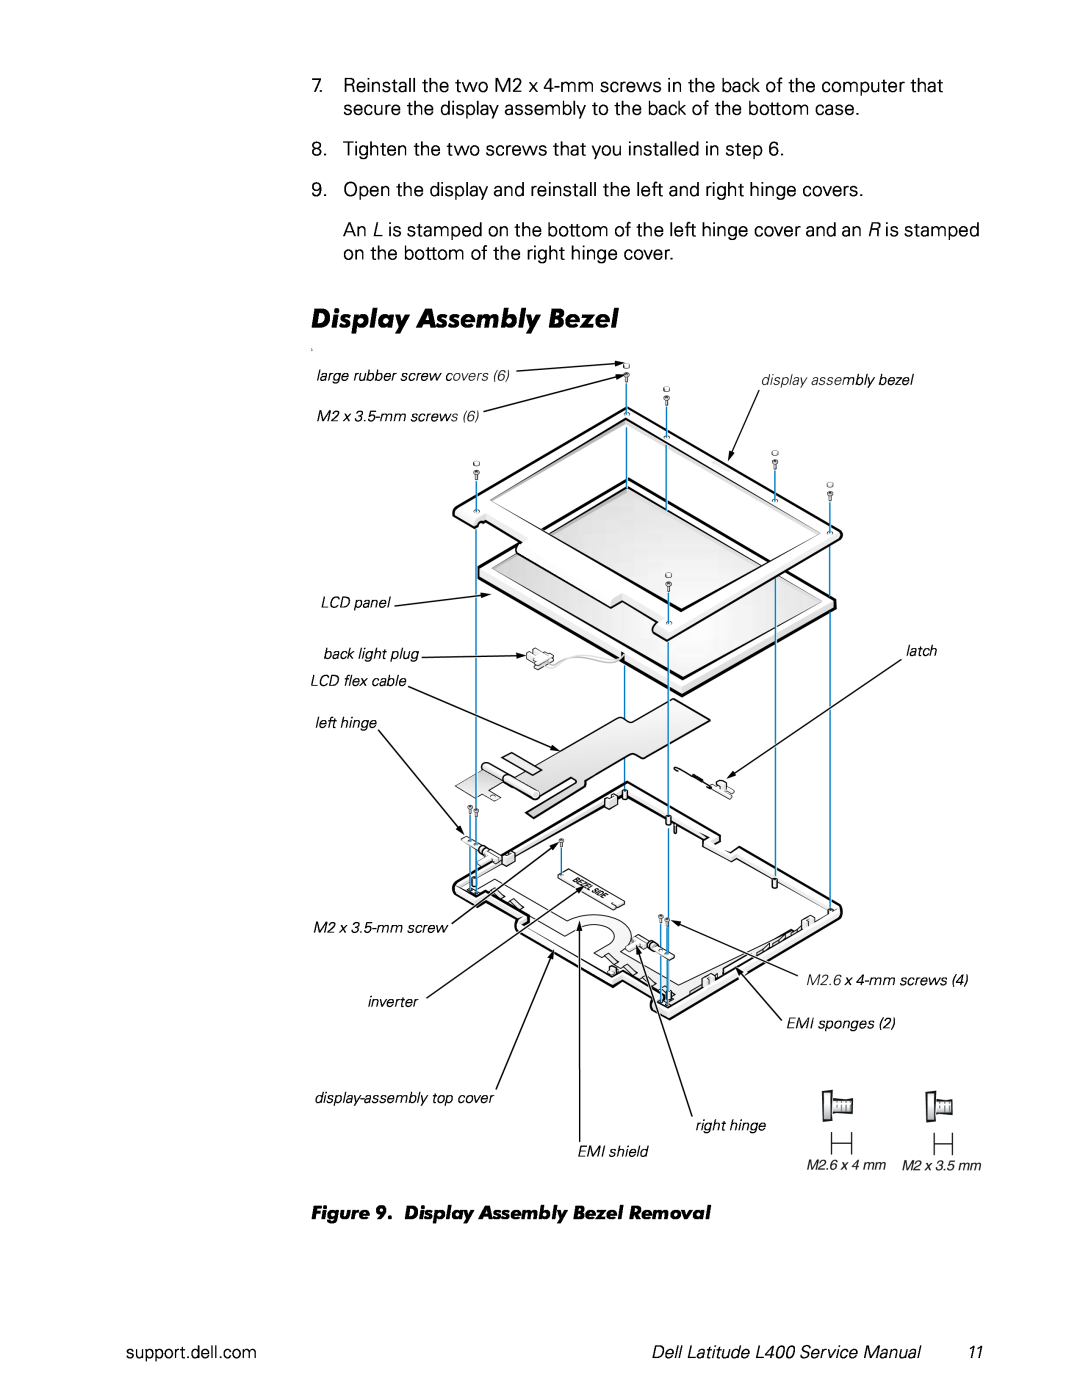 Dell L400 service manual Display Assembly Bezel Removal 